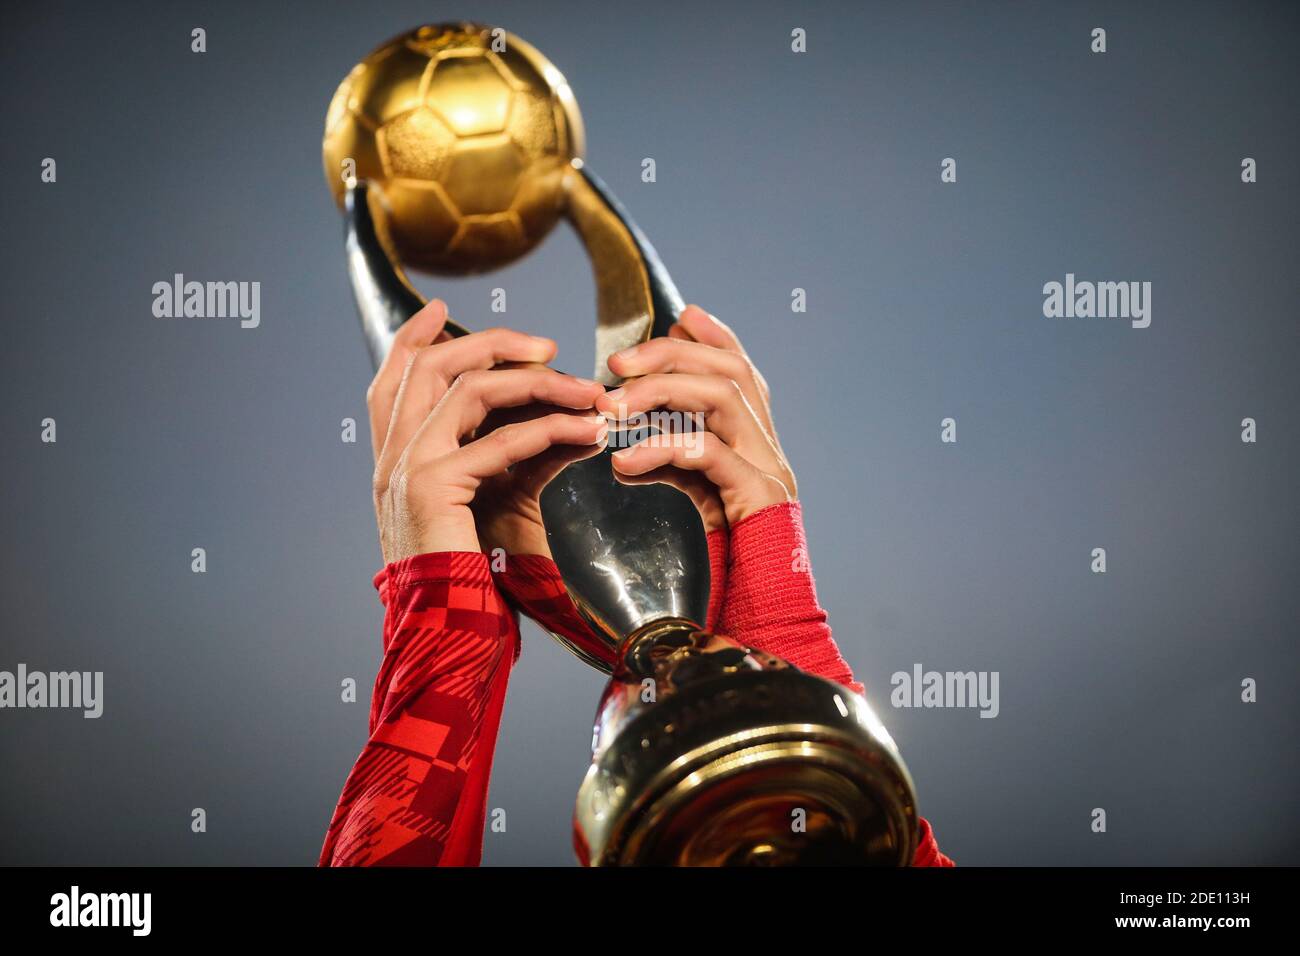 Cairo, Egypt. 27th Nov, 2020. Al Ahly's Kahraba holds up the trophy as his team celebrates winning the African Champions League Final soccer match against Zamalek at Cairo International Stadium. Credit: Samer Abdallah/dpa/Alamy Live News Stock Photo